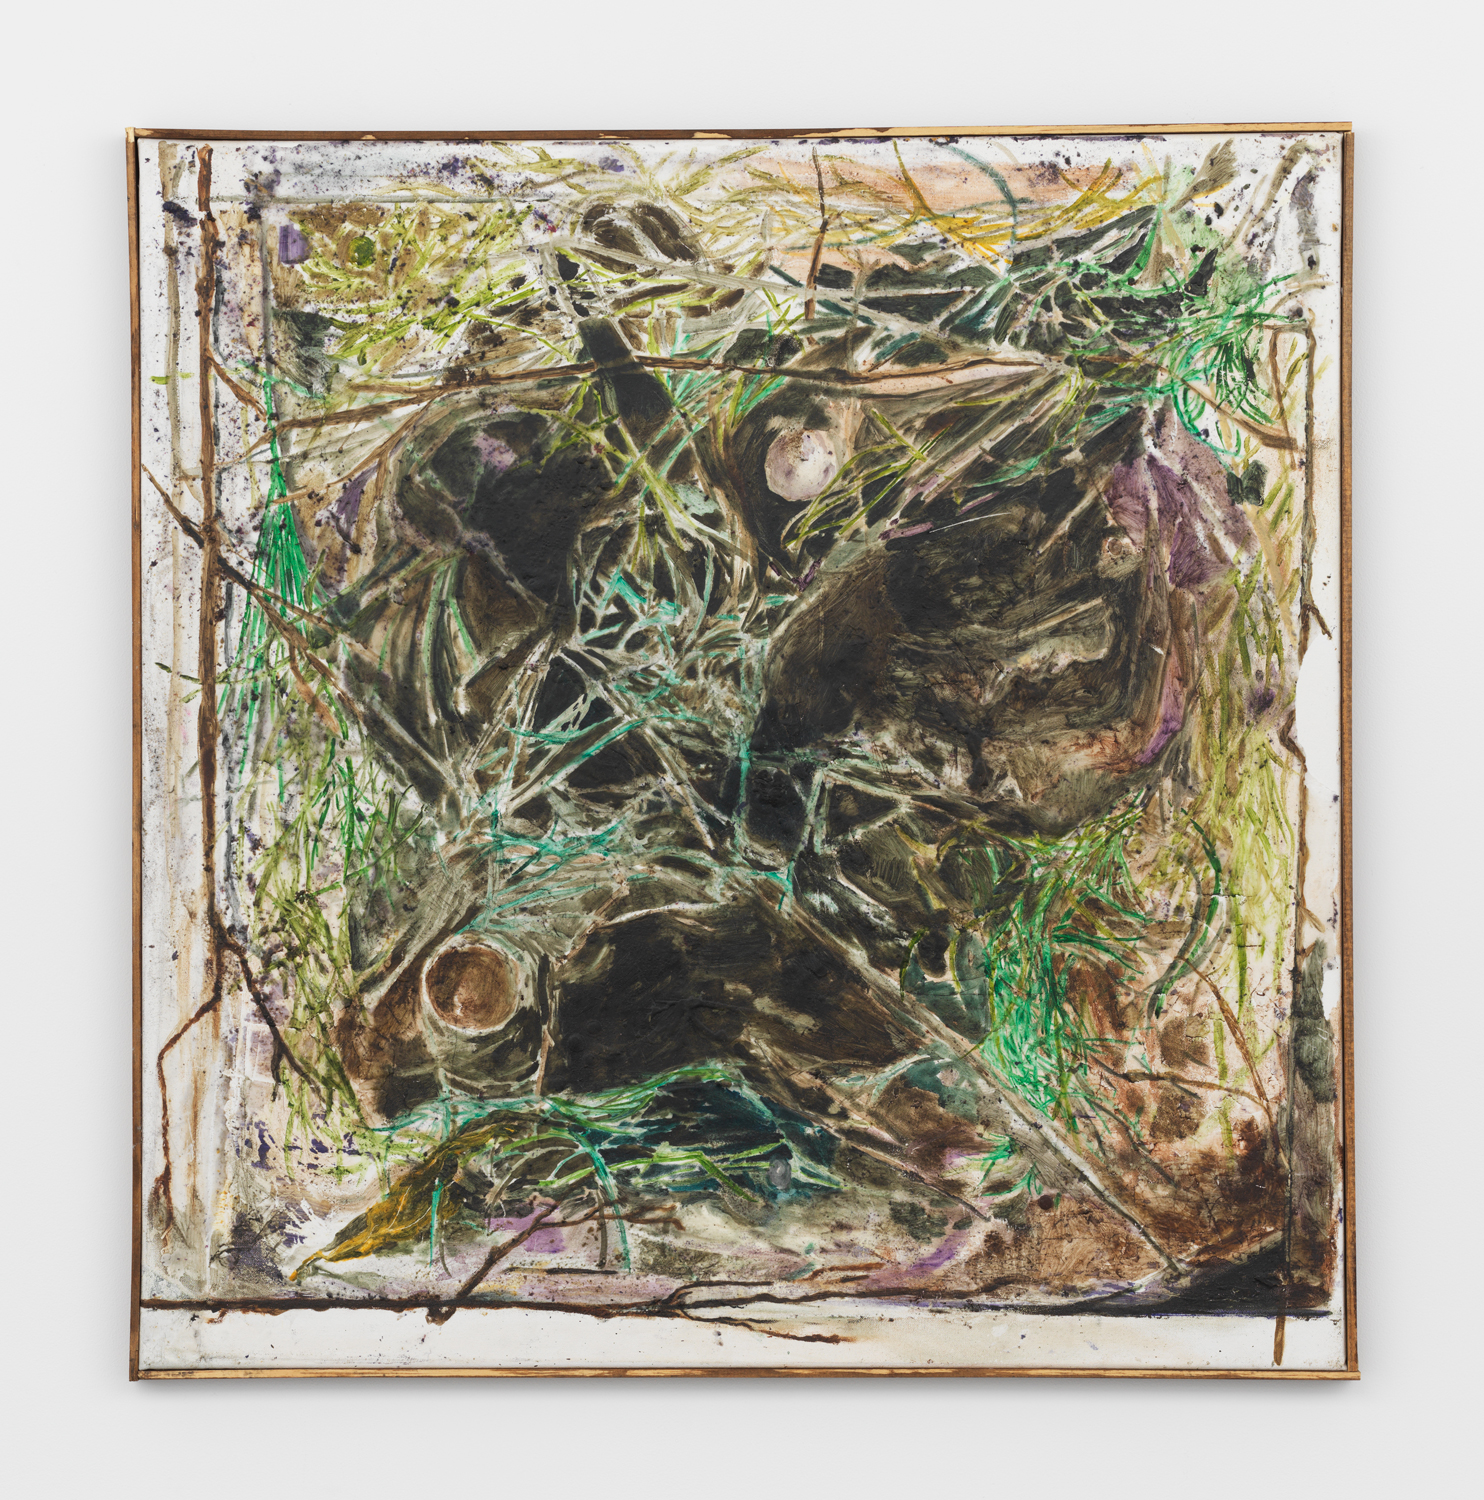 Nikholis Planck, Hermit, 2017, water soluble oil and debris on wax on canvas, 32.50h x 32w in.